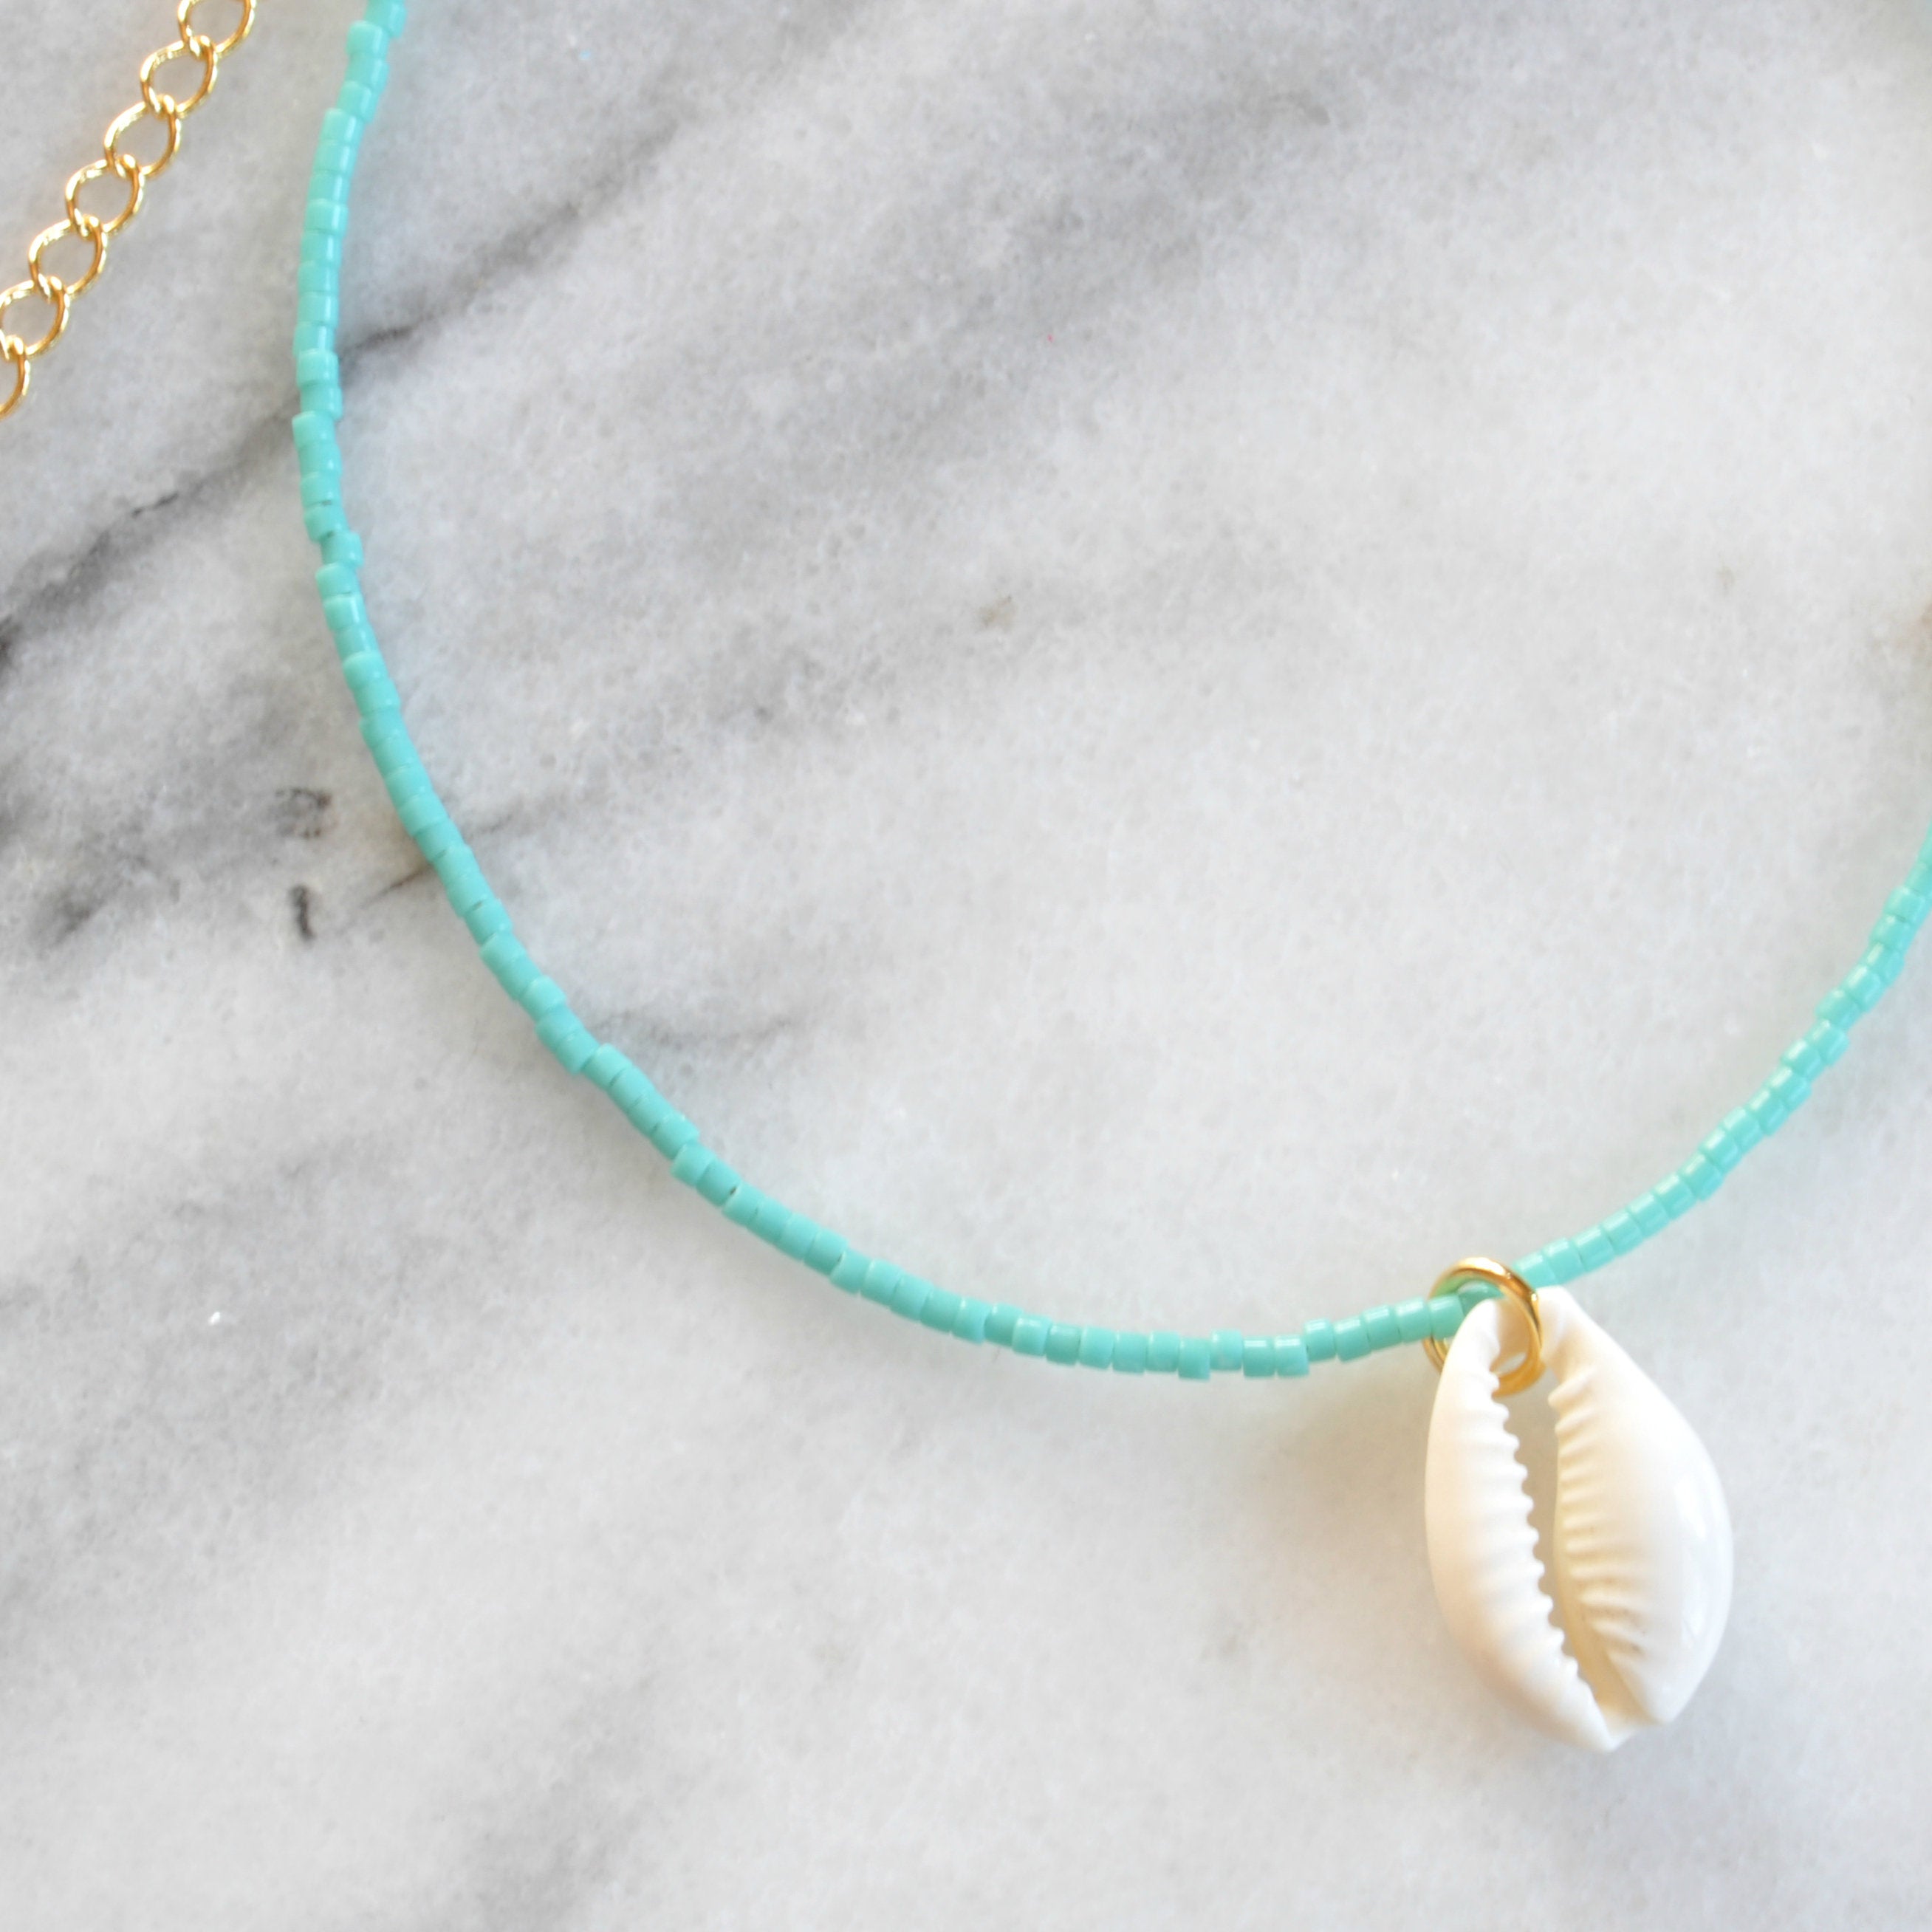 Libby & Smee Seashell Choker Necklace in turquoise with a cowrie seashell, Close up